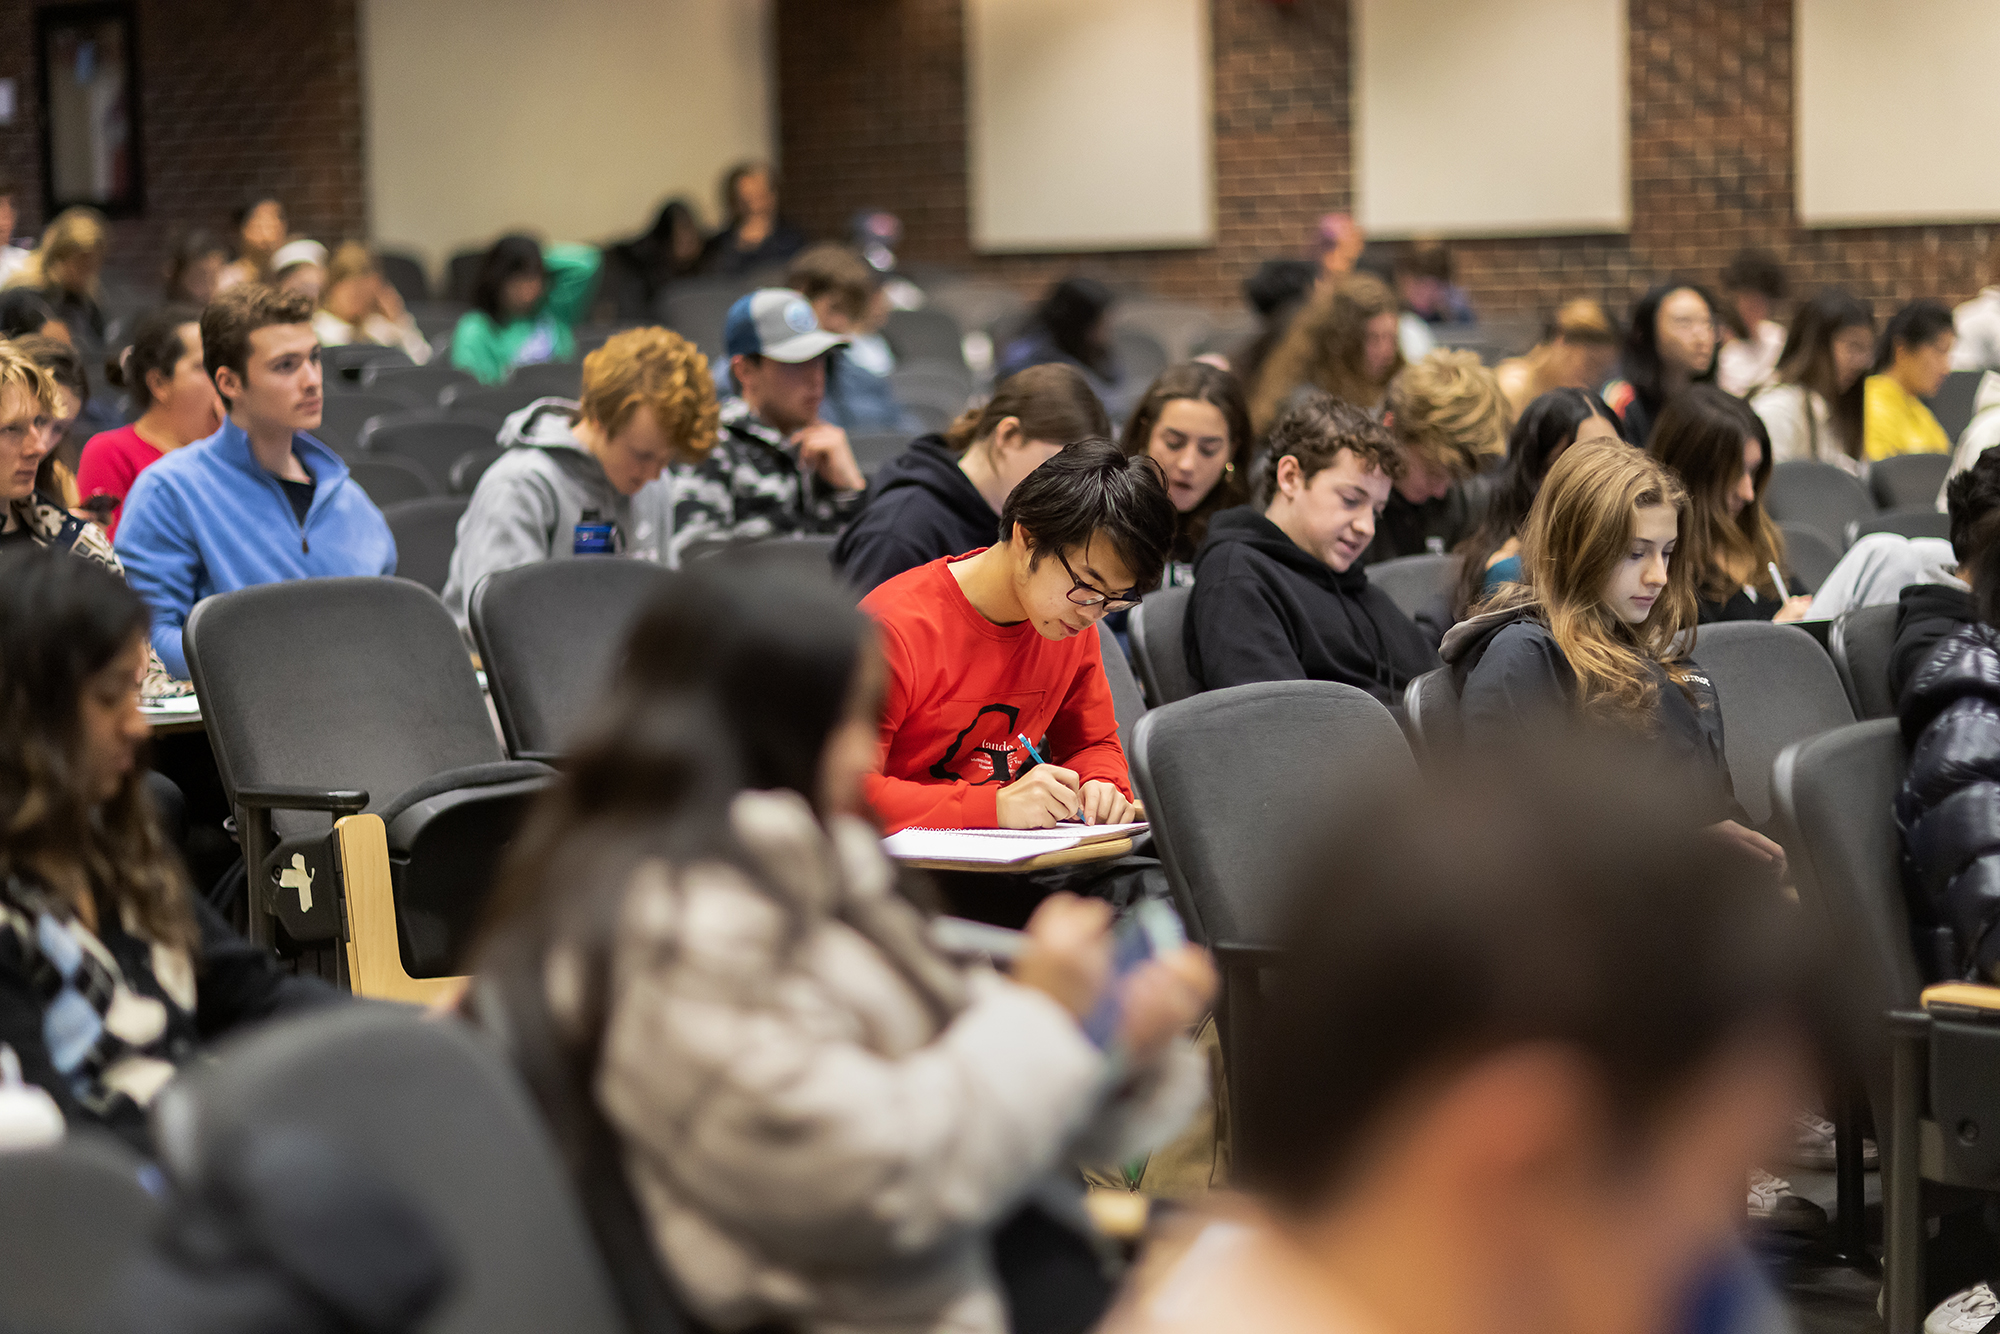 Students work in a lecture hall at Penn.